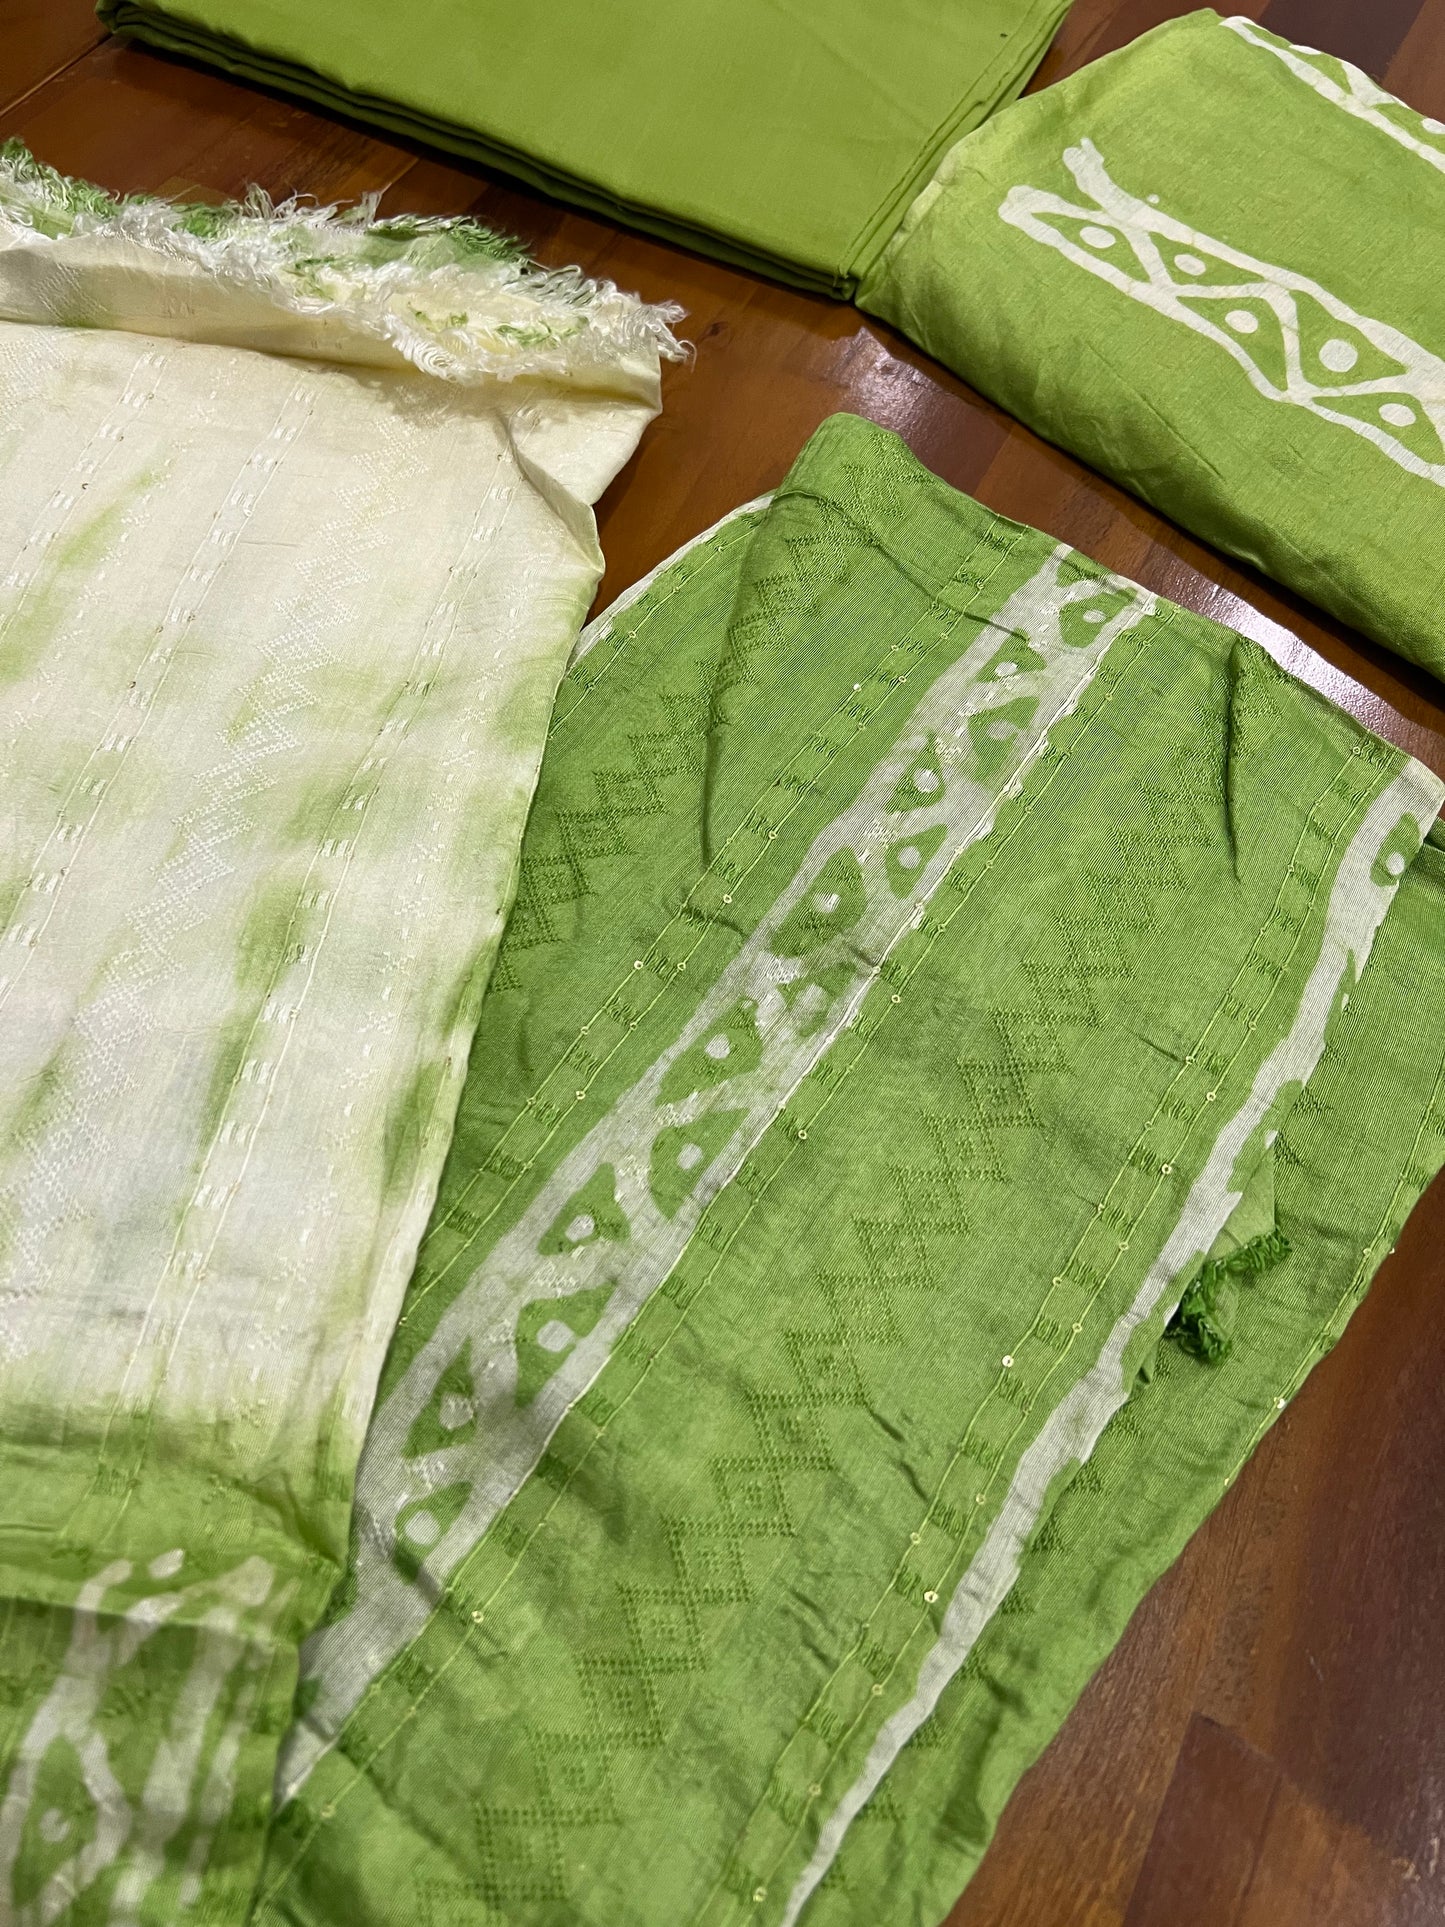 Southloom™ Cotton Churidar Salwar Suit Material in Light Green with Printed Design